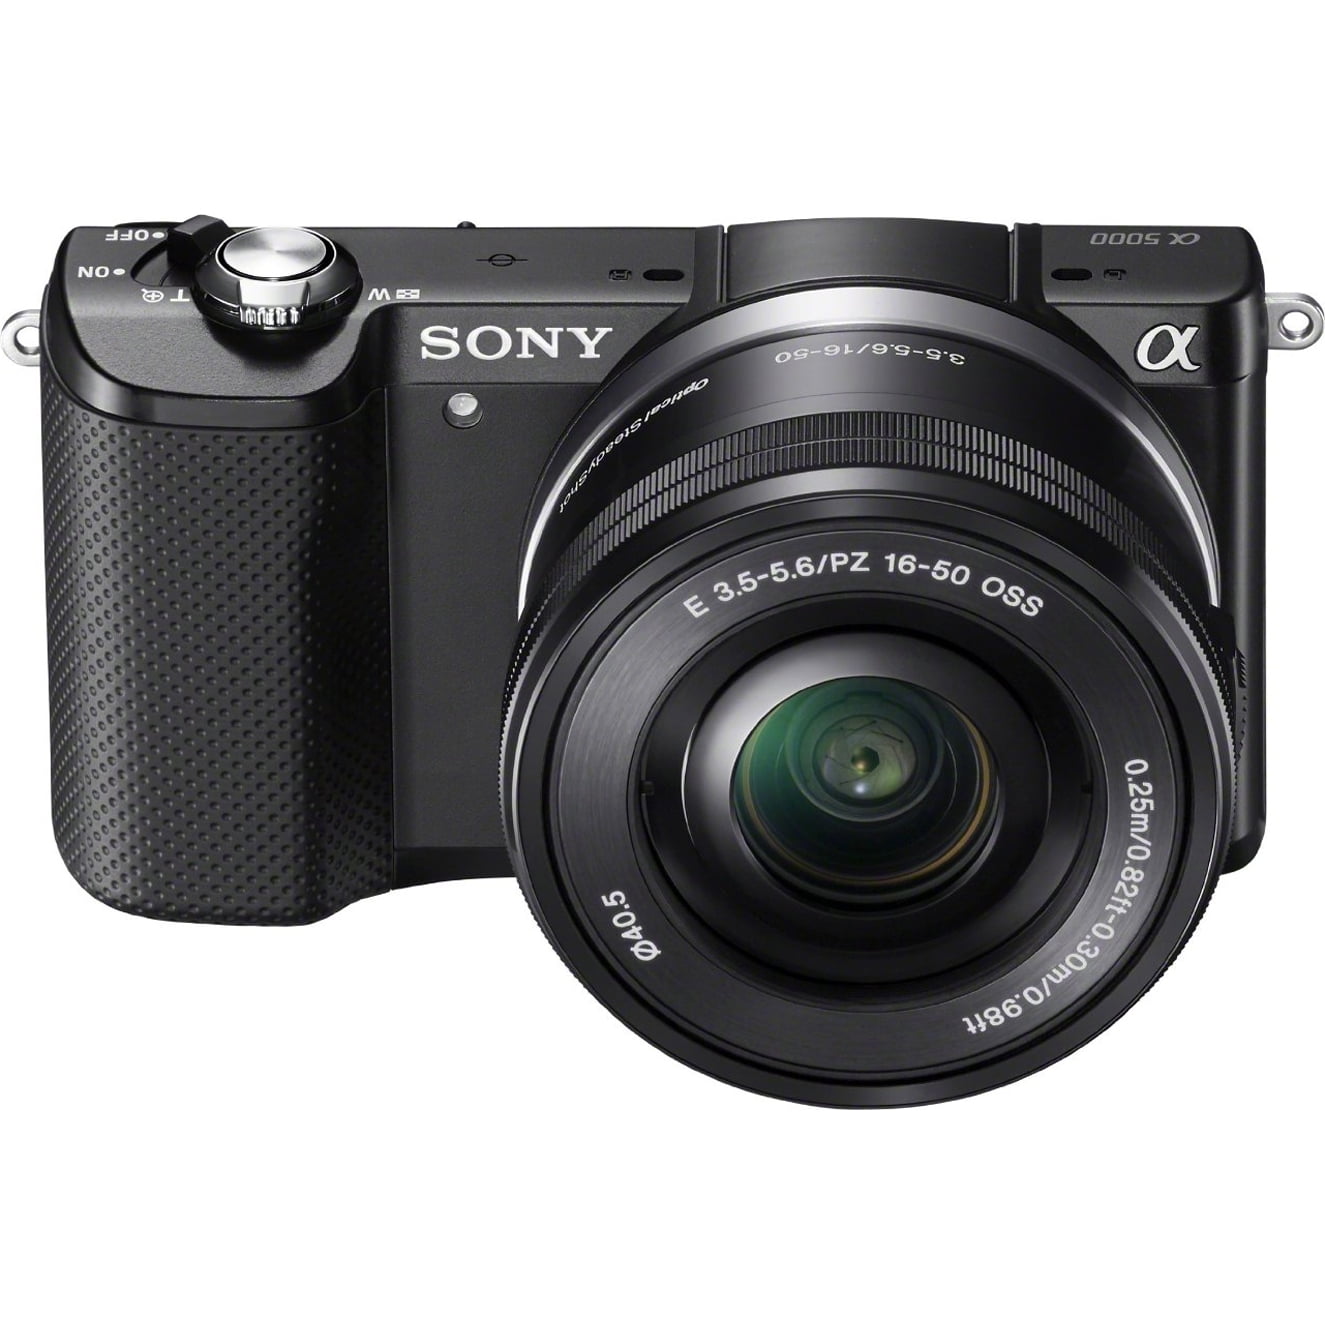 Sony Alpha a Digital SLR Camera with .1 Megapixels and